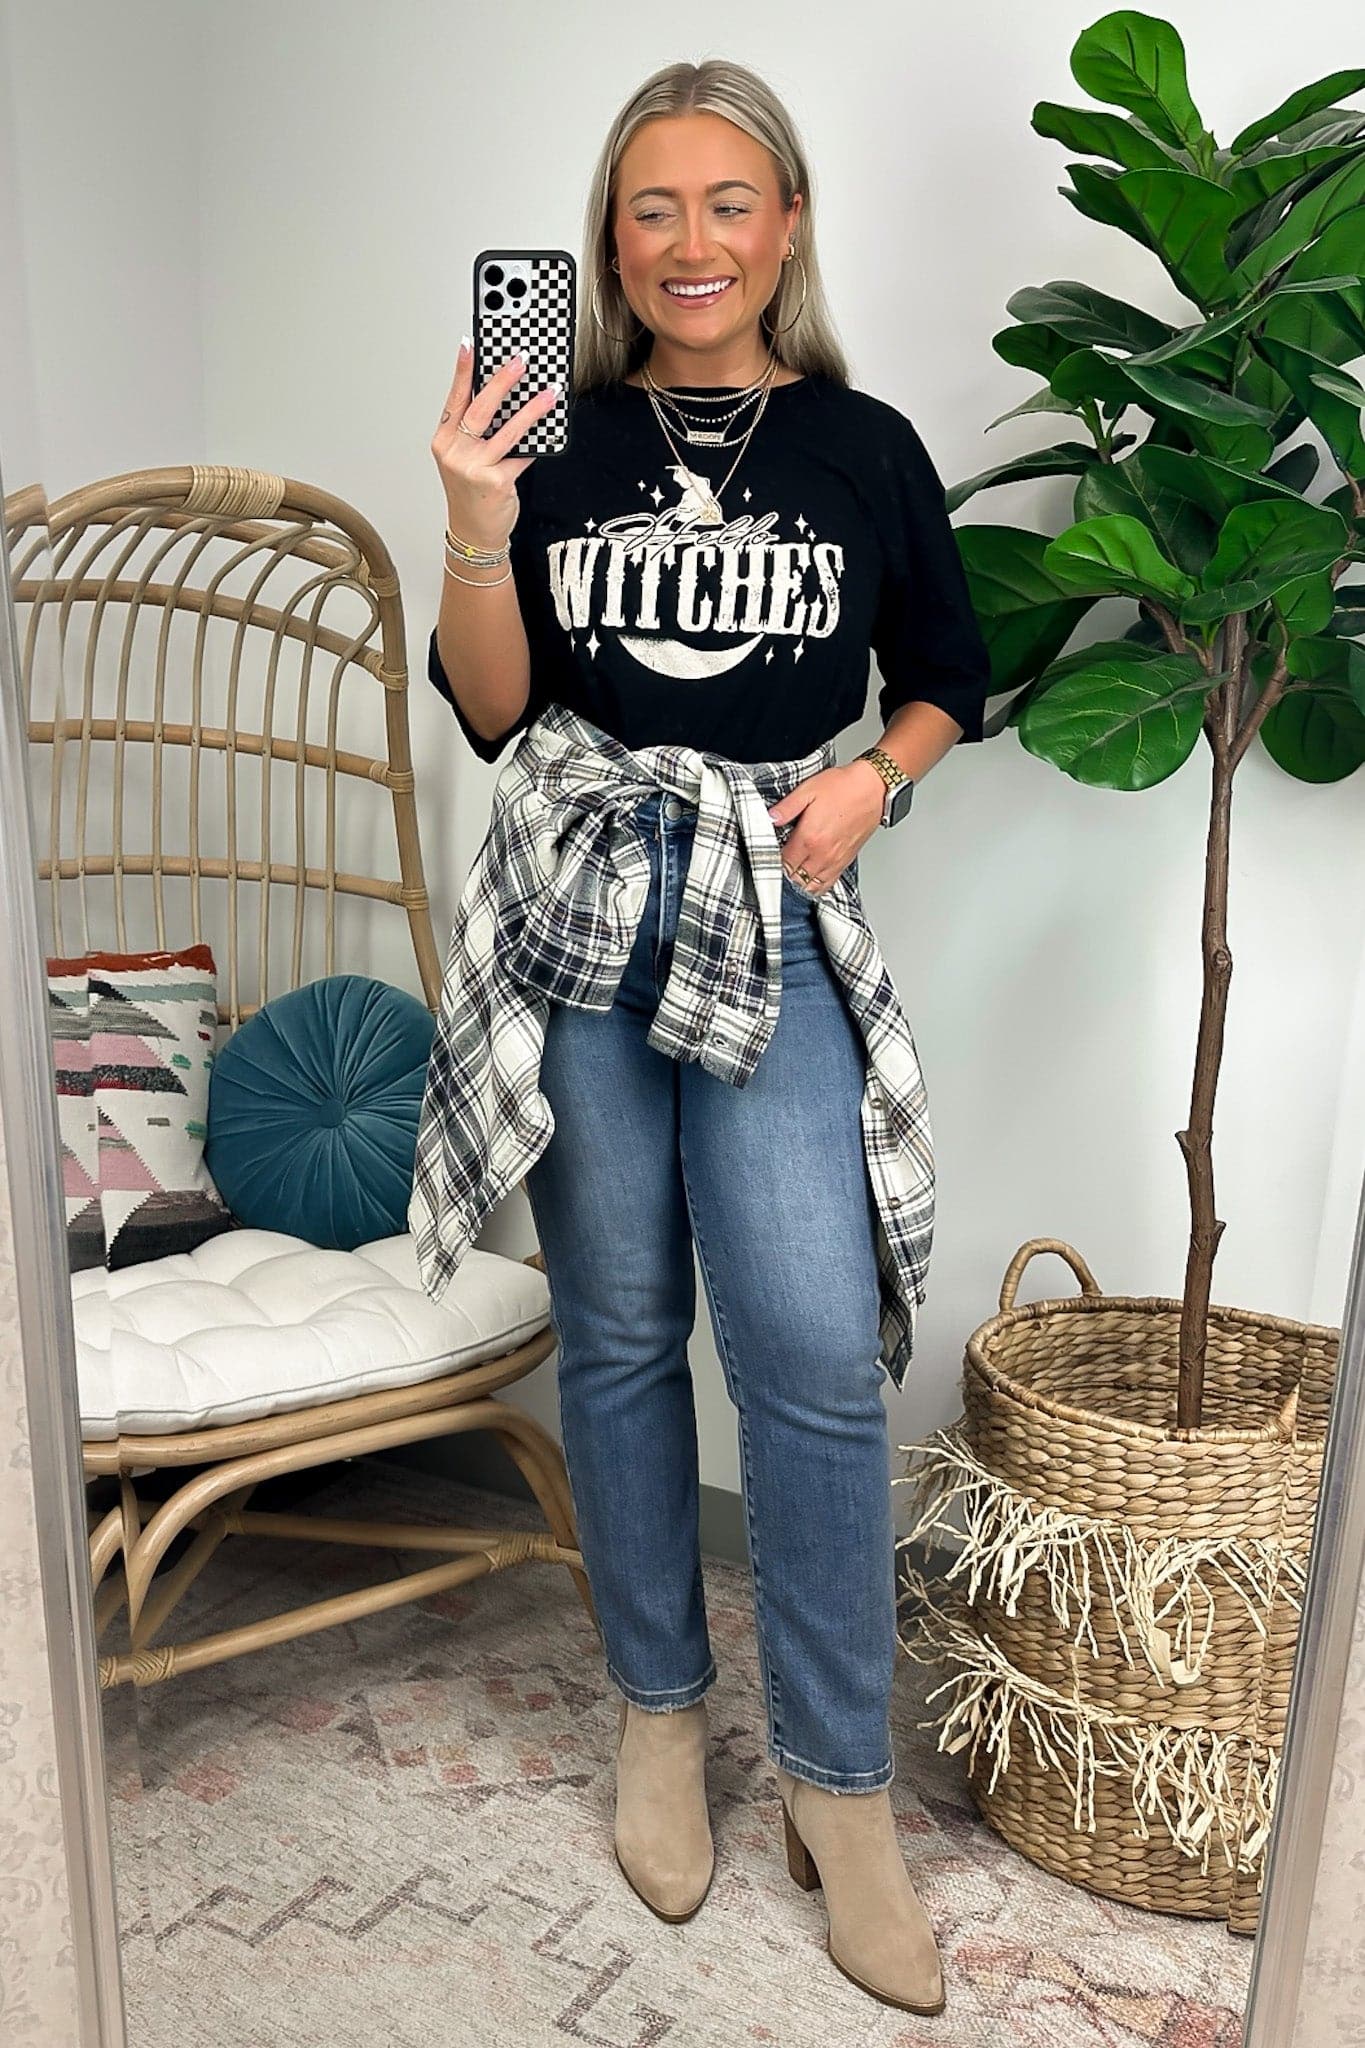  Hello Witches Oversized Graphic Tee - FINAL SALE - Madison and Mallory